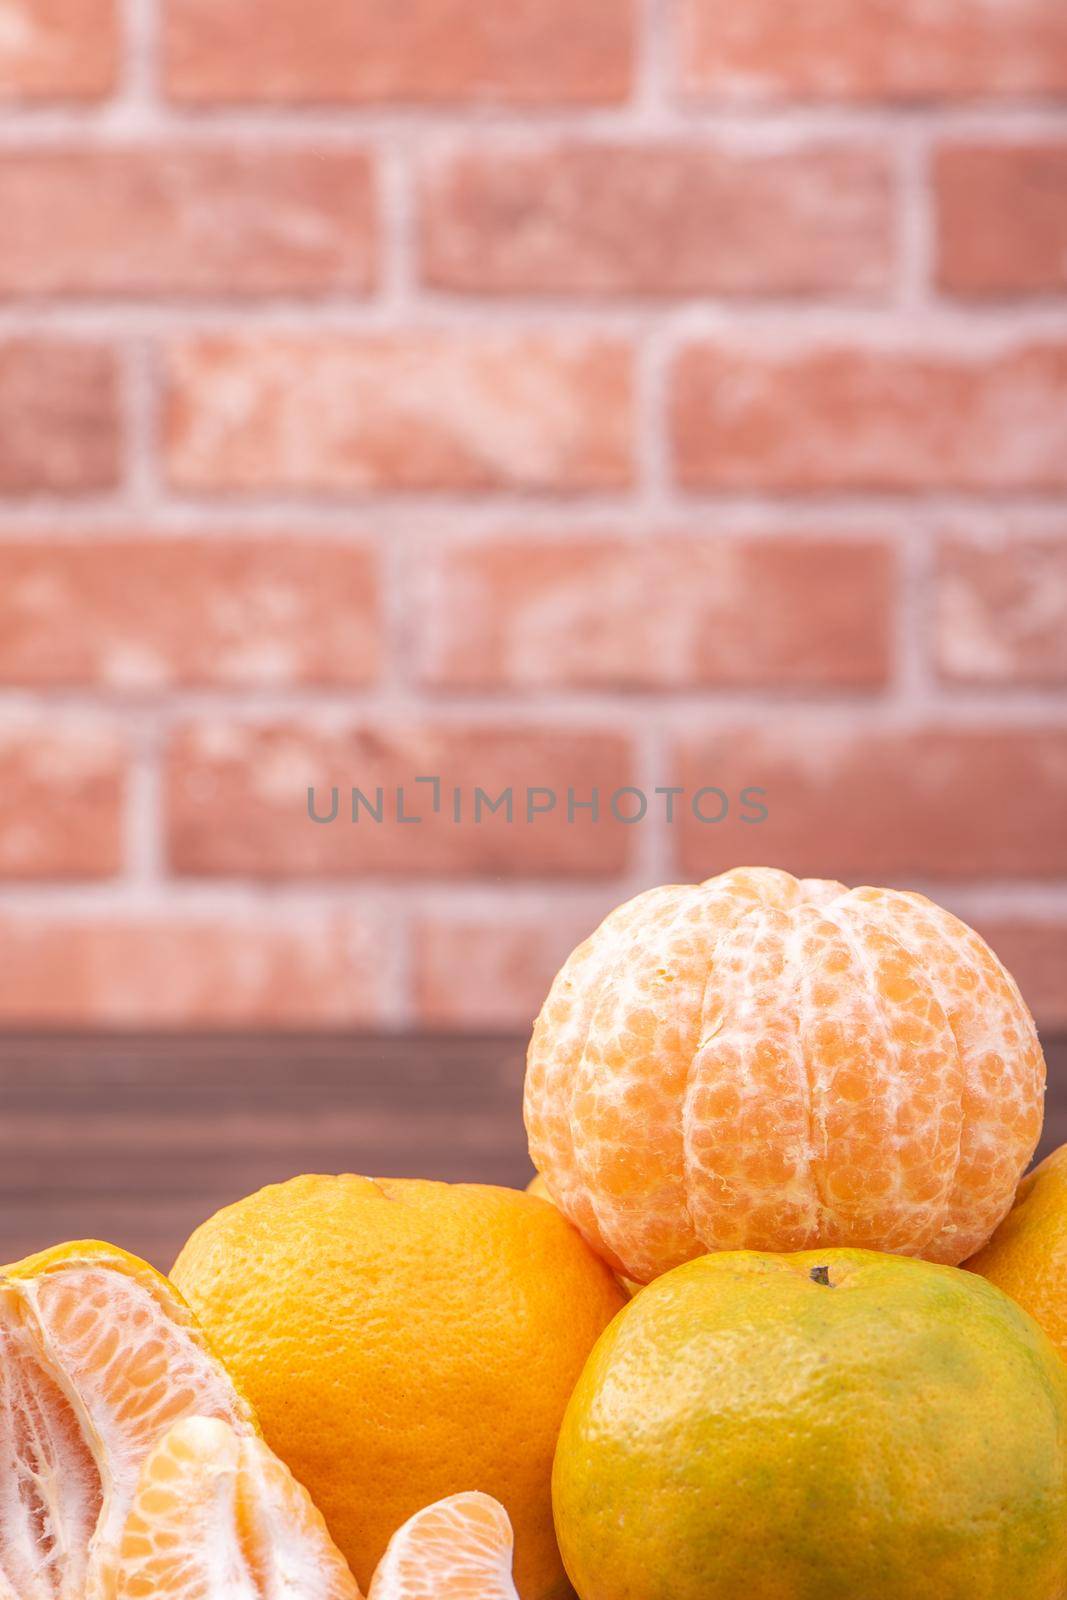 Peeled tangerines in a bamboo sieve basket on dark wooden table with red brick wall background, Chinese lunar new year fruit design concept, close up. by ROMIXIMAGE